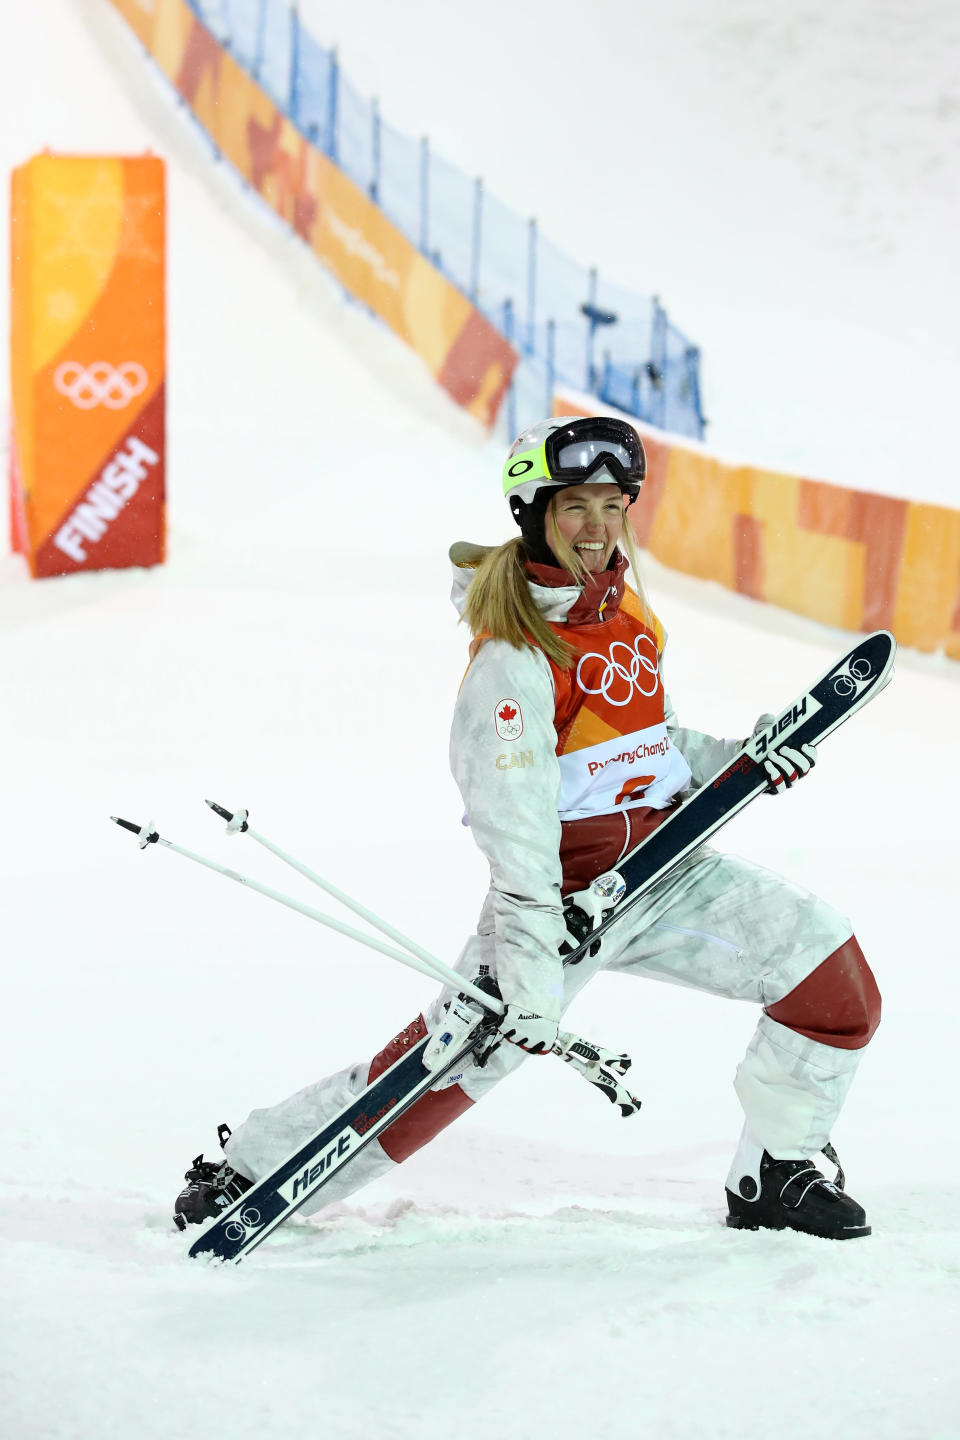 <p>Justine Dufour-Lapointe of Canada celebrates winning silver during the Freestyle Skiing Ladies’ Moguls Final on day two of the PyeongChang 2018 Winter Olympic Games at Phoenix Snow Park on February 11, 2018 in Pyeongchang-gun, South Korea. (Photo by Cameron Spencer/Getty Images) </p>